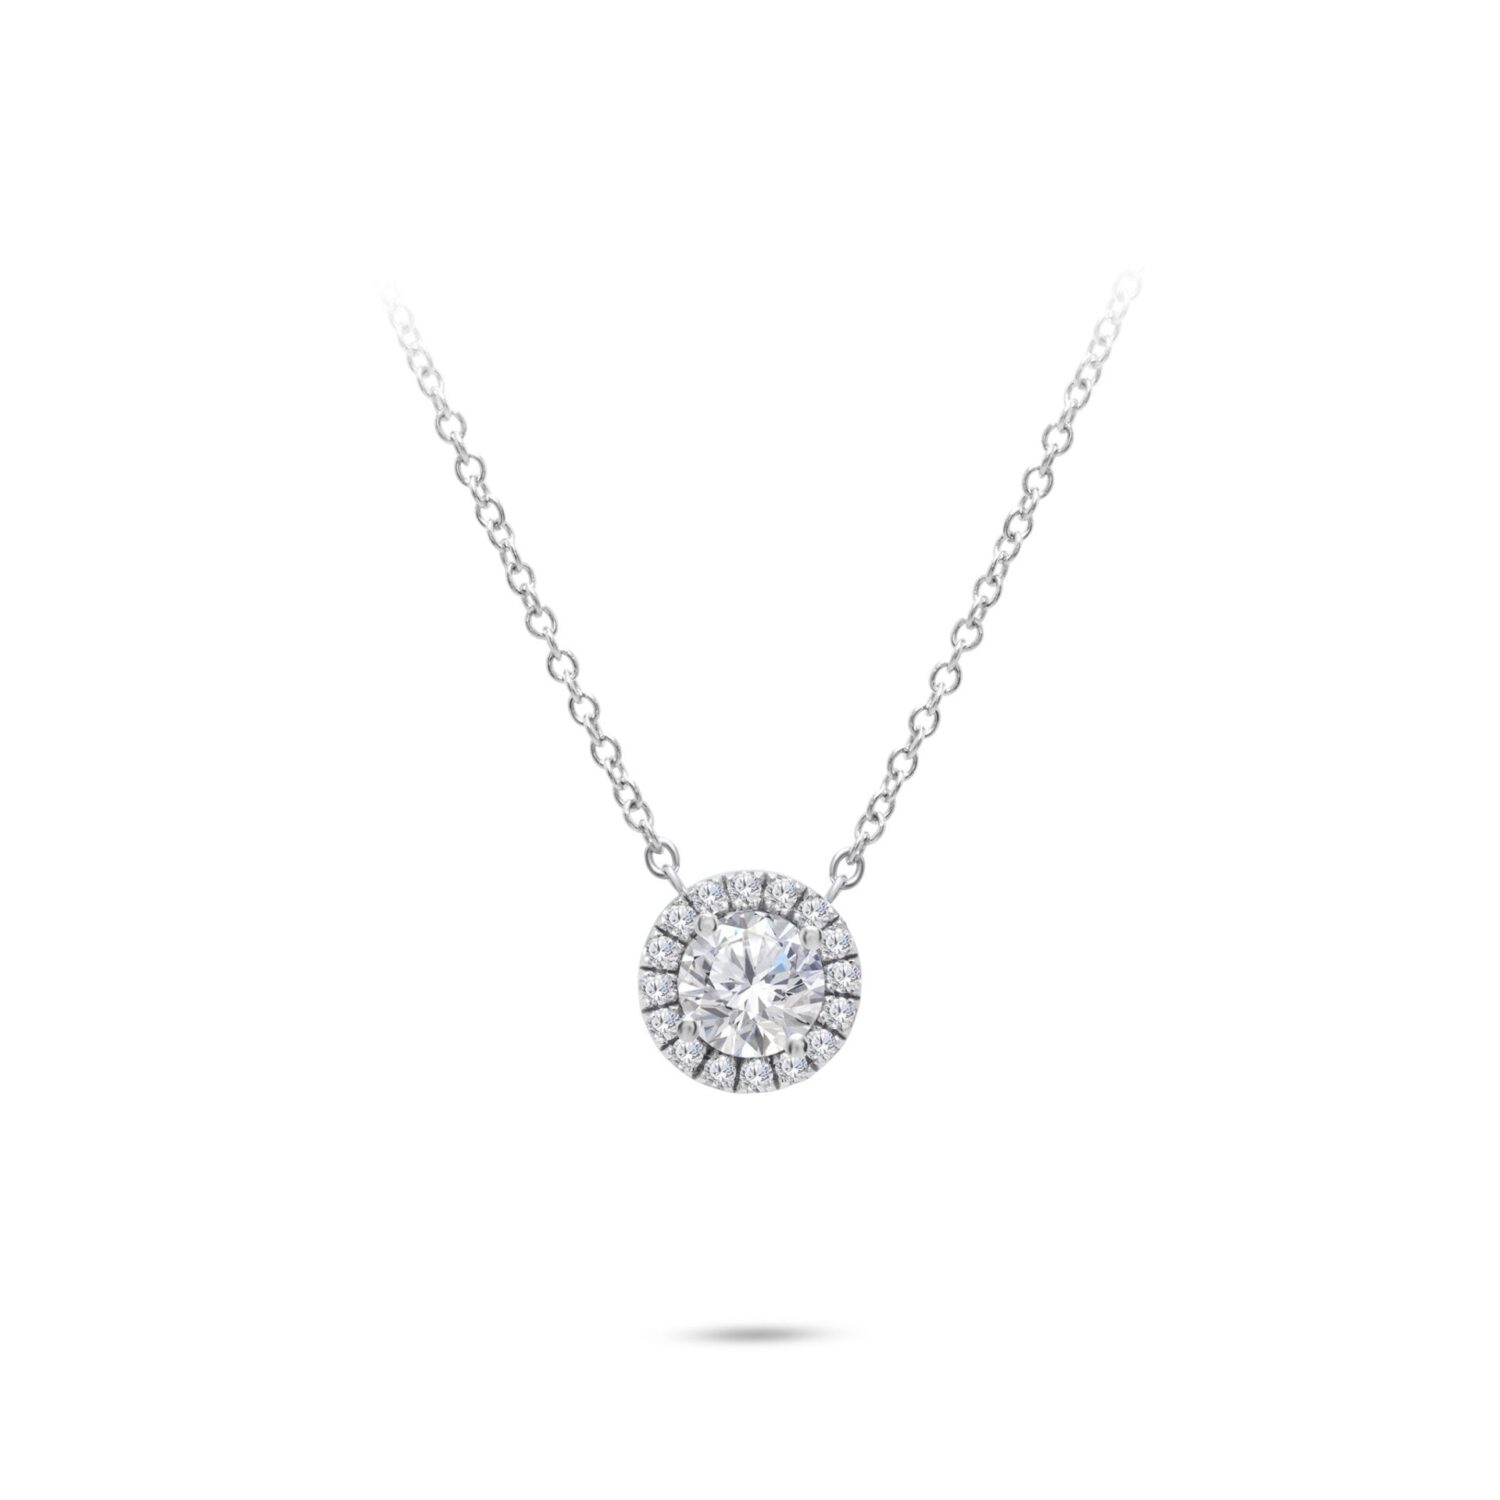 Lab grown diamonds in Cyprus - Sunshine Necklace 1.0 Carat best quality and price